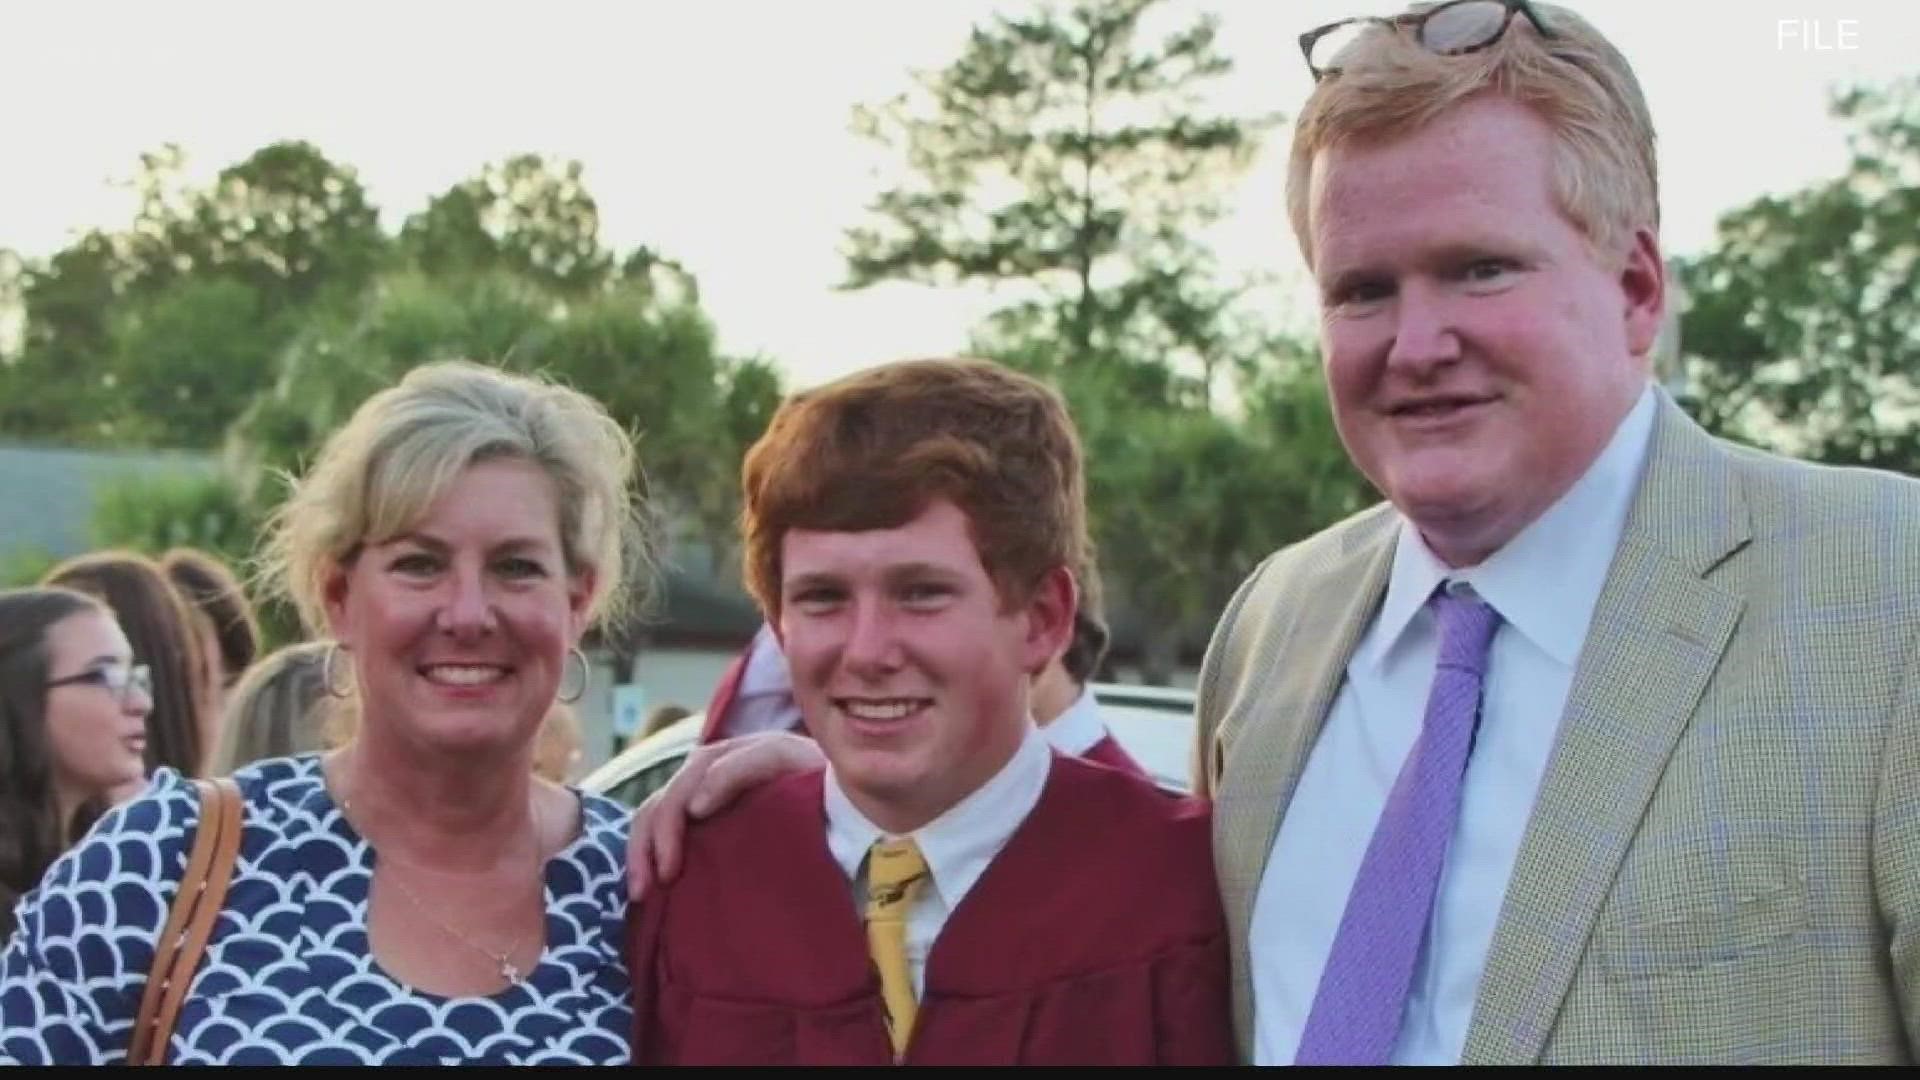 Disgraced South Carolina attorney Alex Murdaugh has now been charged with the 2021 death of his wife Maggie and son Paul.